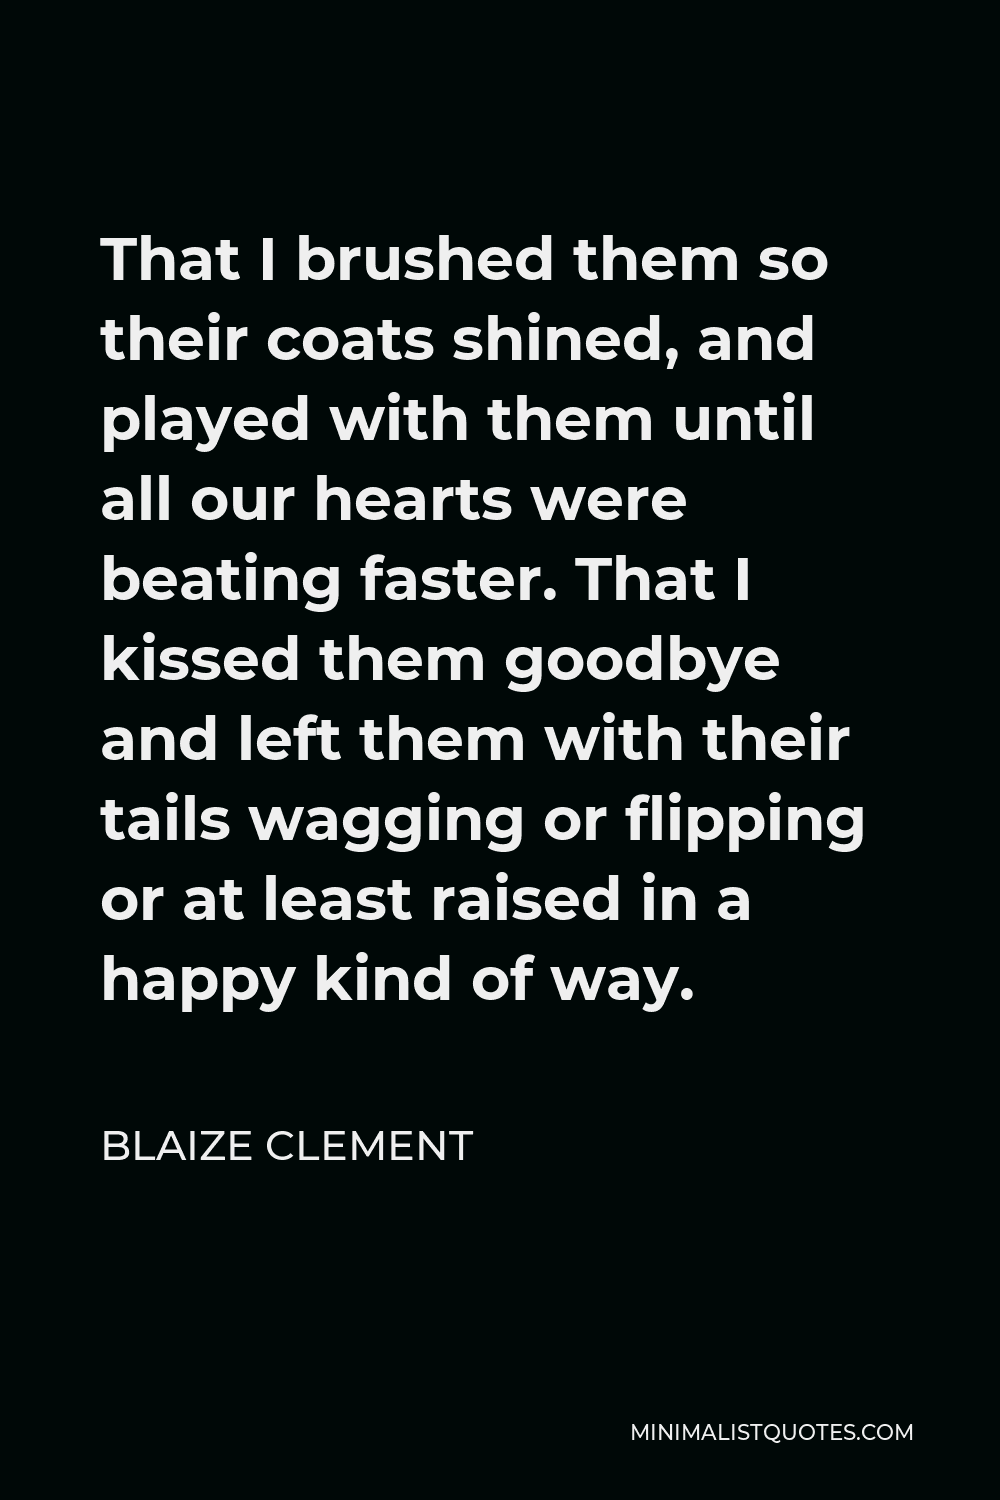 Blaize Clement Quote - That I brushed them so their coats shined, and played with them until all our hearts were beating faster. That I kissed them goodbye and left them with their tails wagging or flipping or at least raised in a happy kind of way.